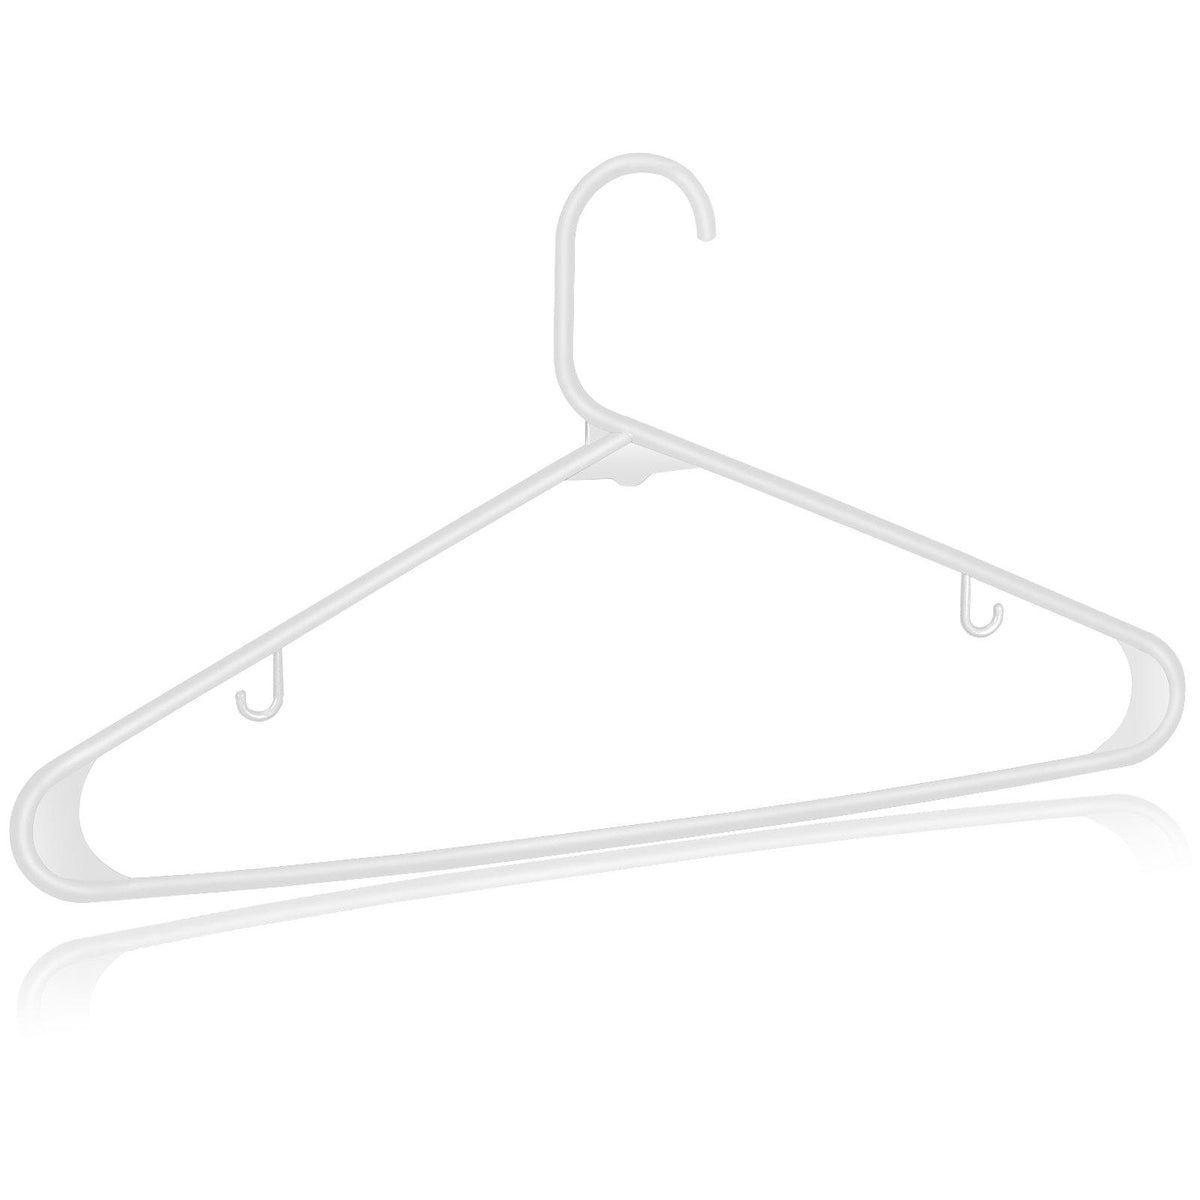 Zenstyle 100 Pack Standard Size White Plastic Hangers for Clothes Lightweight Space Saving Tubular Clothing Hangers (White)